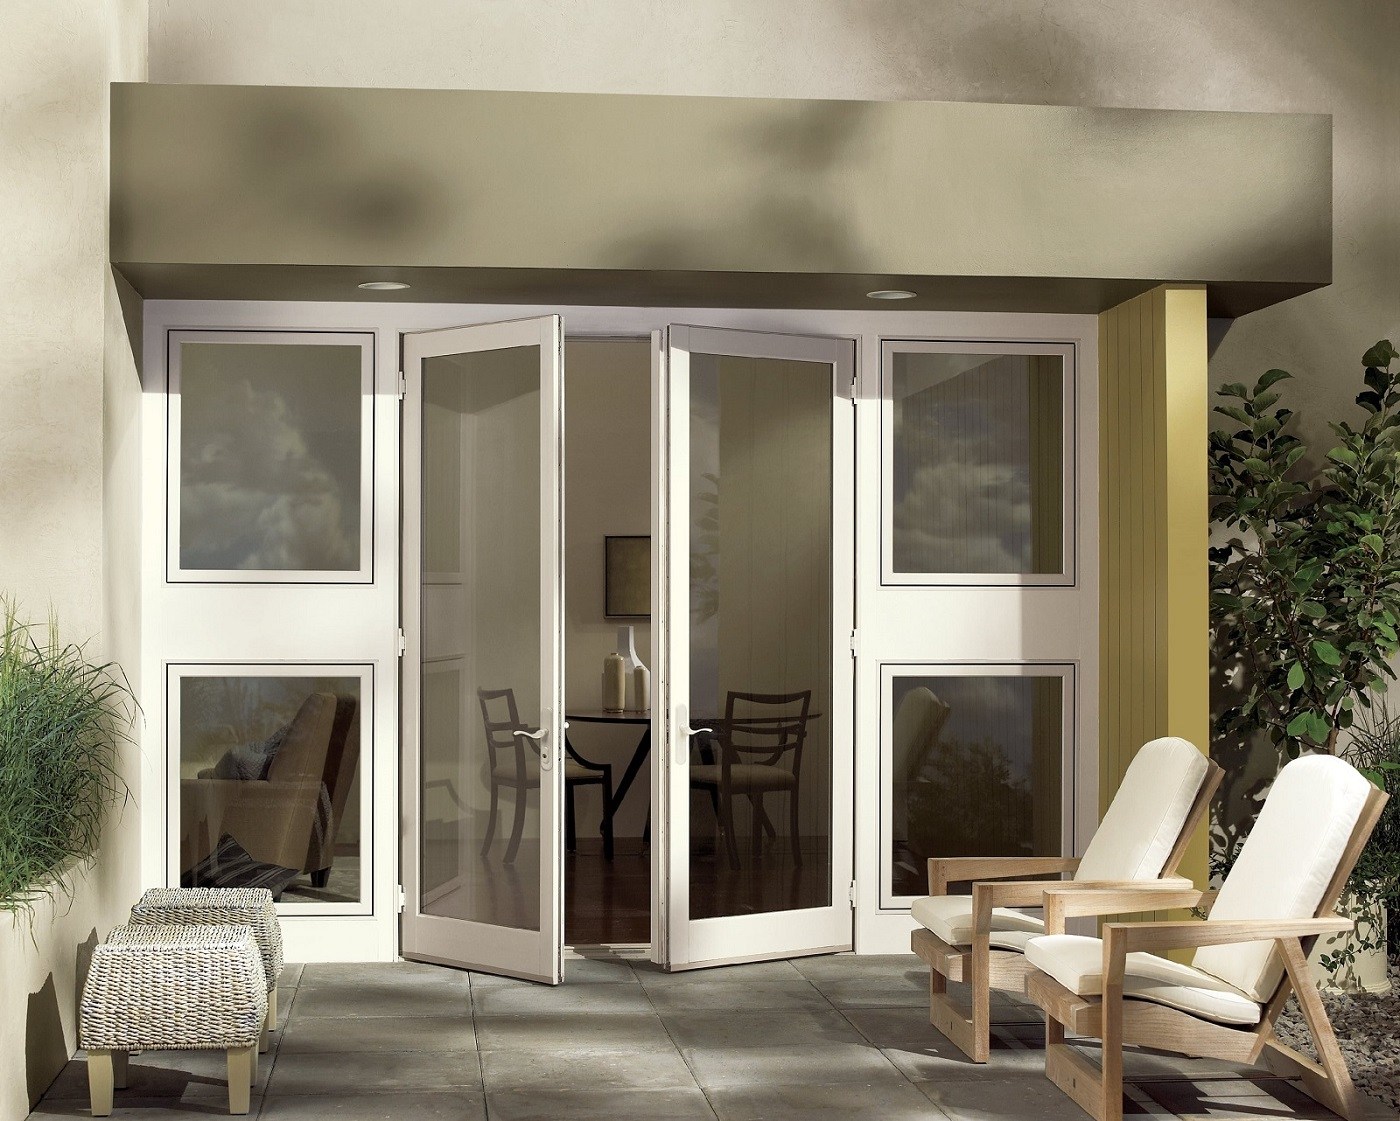 Choosing a Patio Door That Fits Your Style